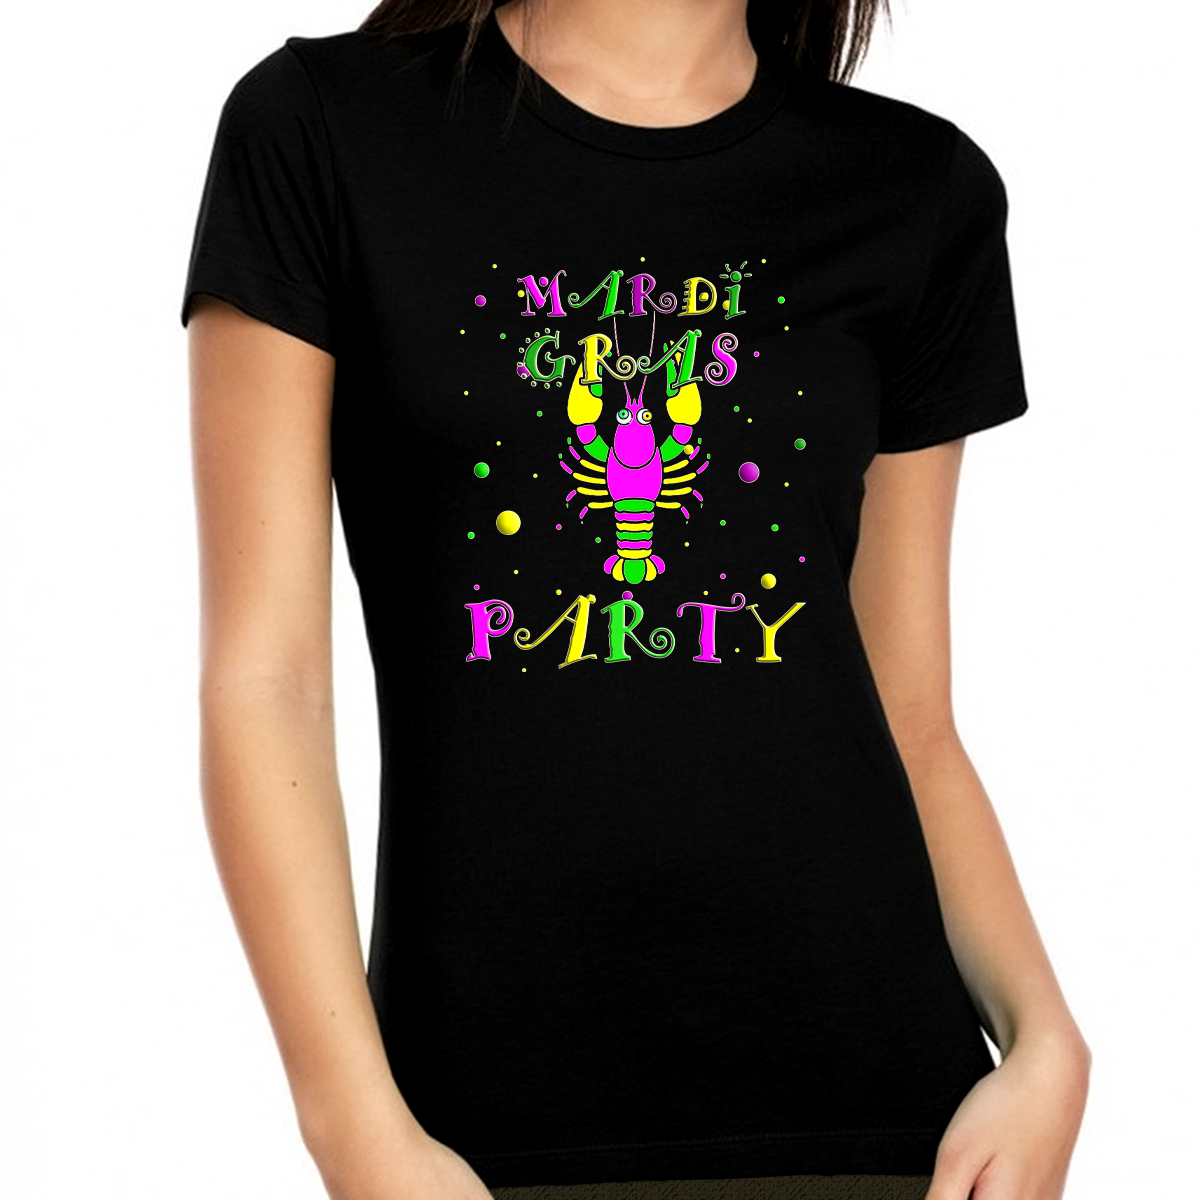 Mardi Gras Shirts for Women Funny Crayfish Mardi Gras Party Mardi Gras Parade NOLA Shirt Mardi Gras Outfit